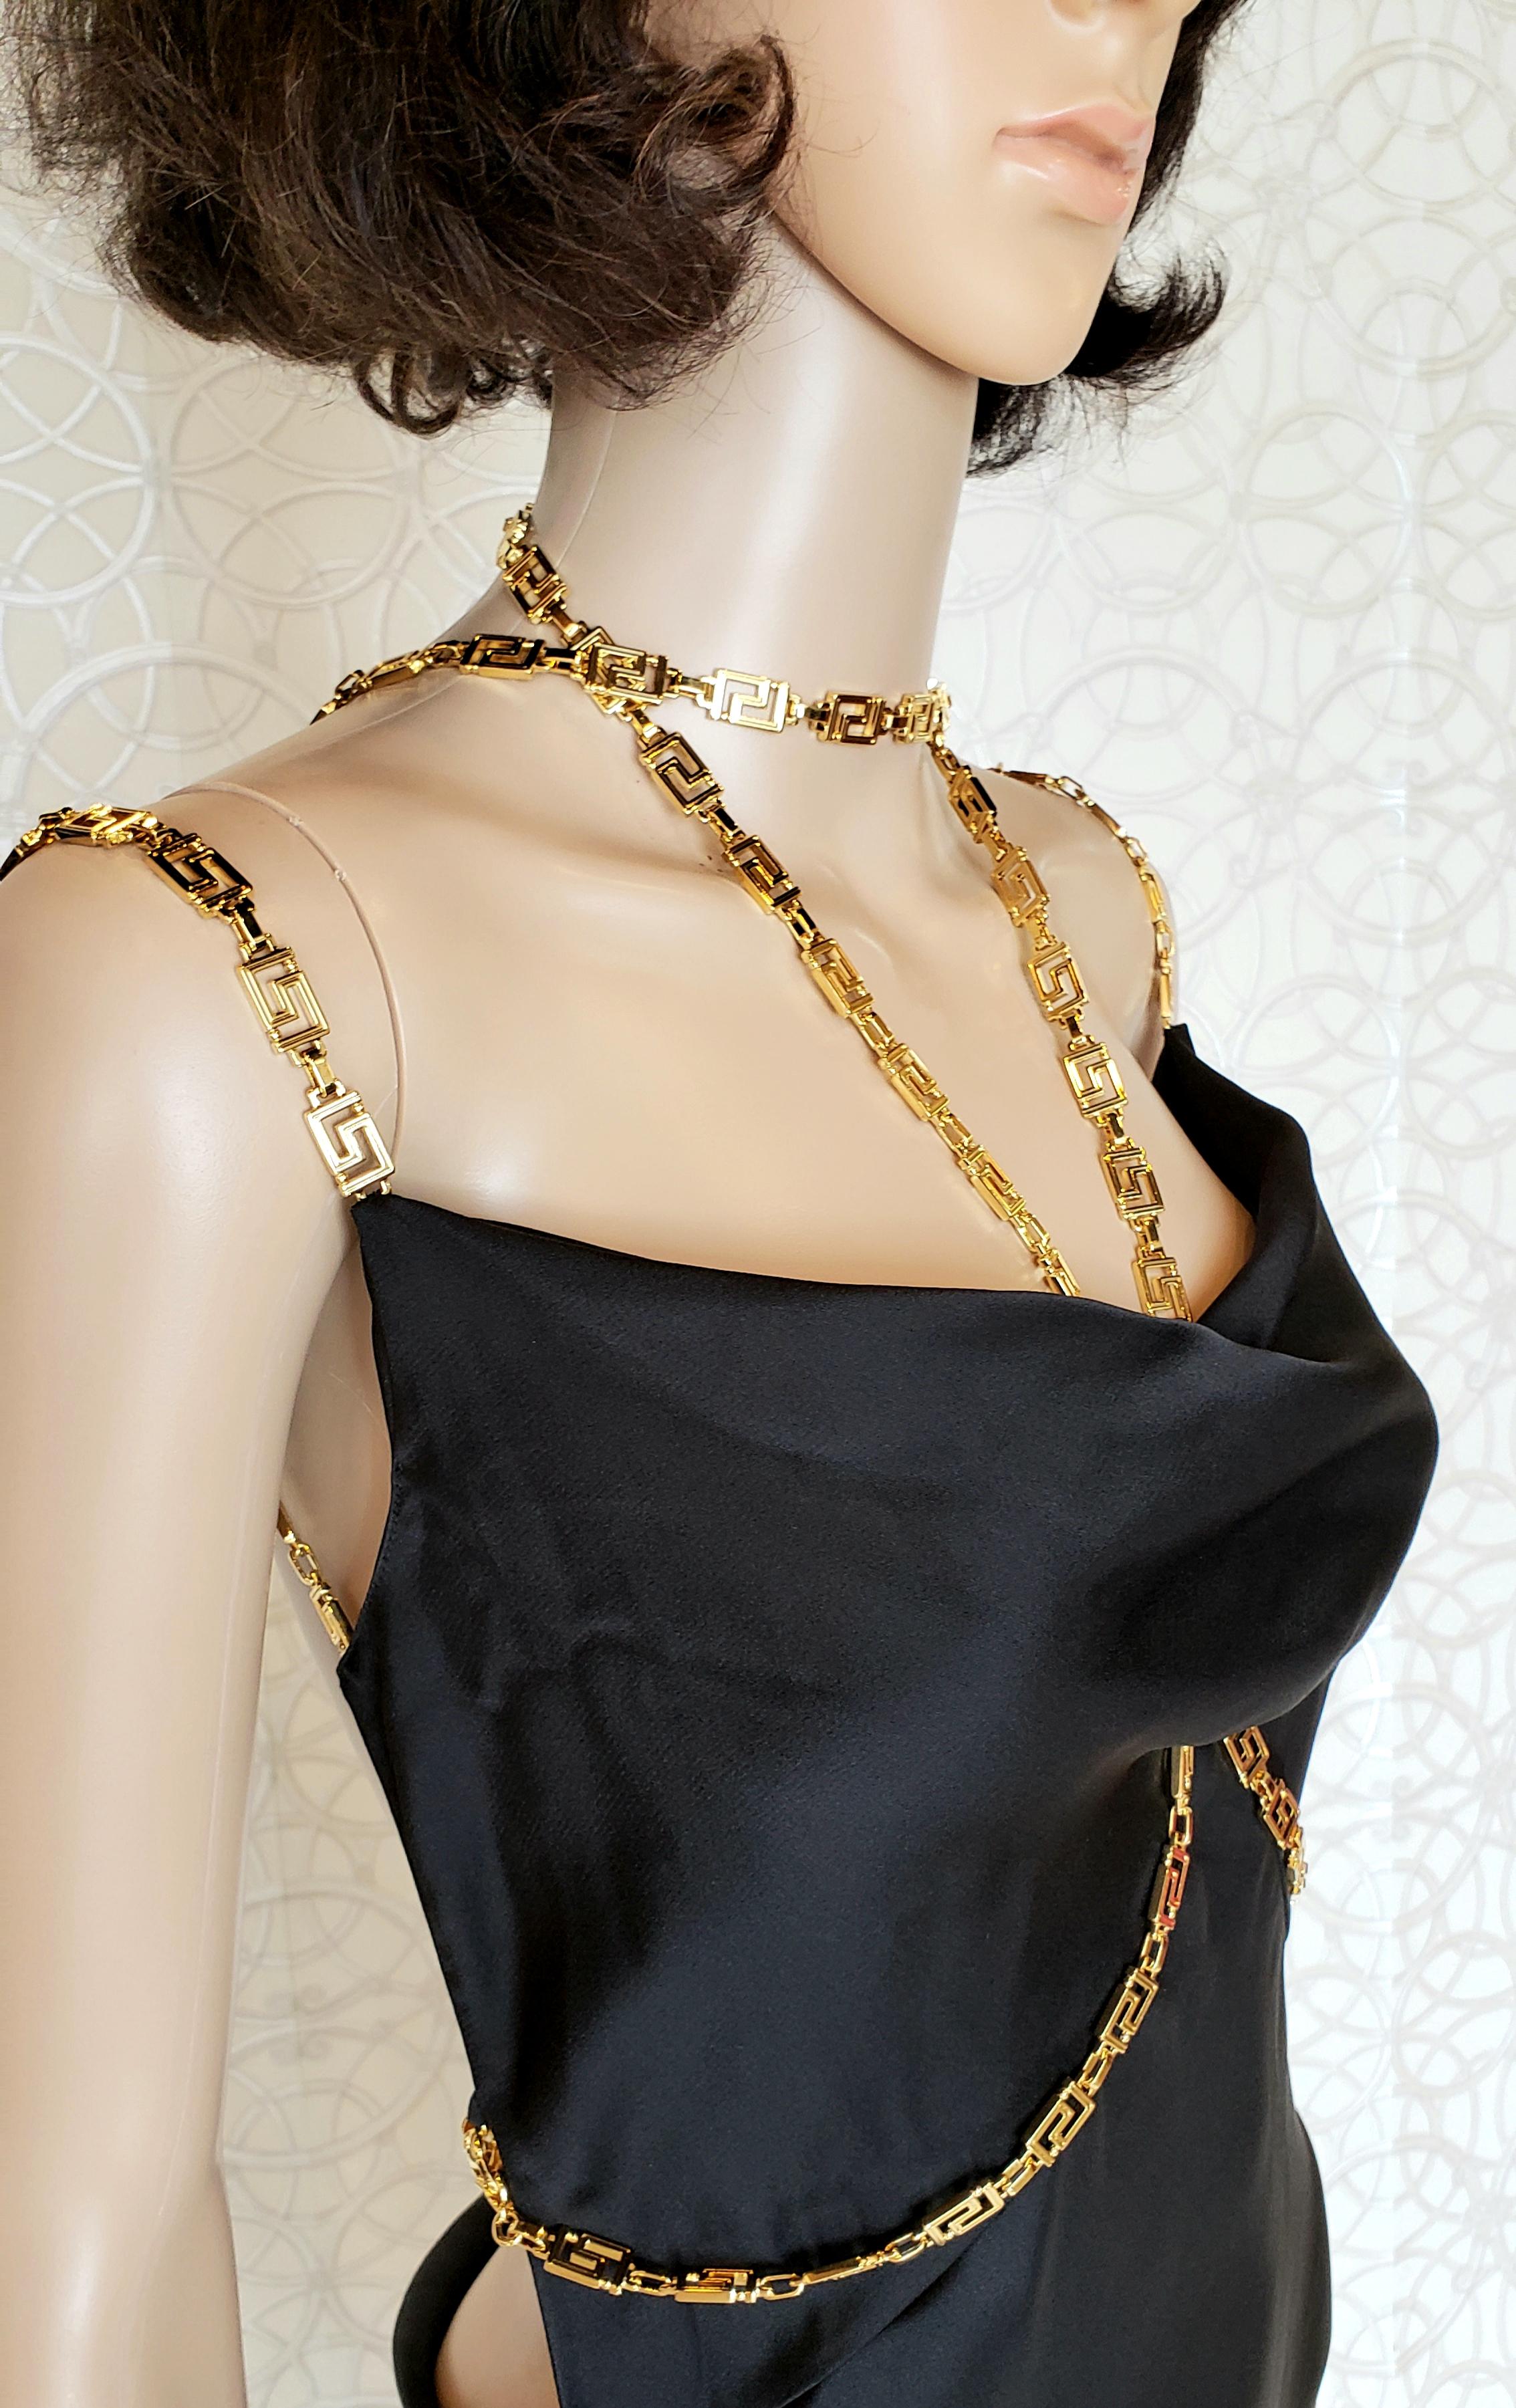 F/W 2019 Look #60 NEW VERSACE BLACK DRESS GOWN W/GOLD TONE CHAINS DETAILS 38 - 2 2